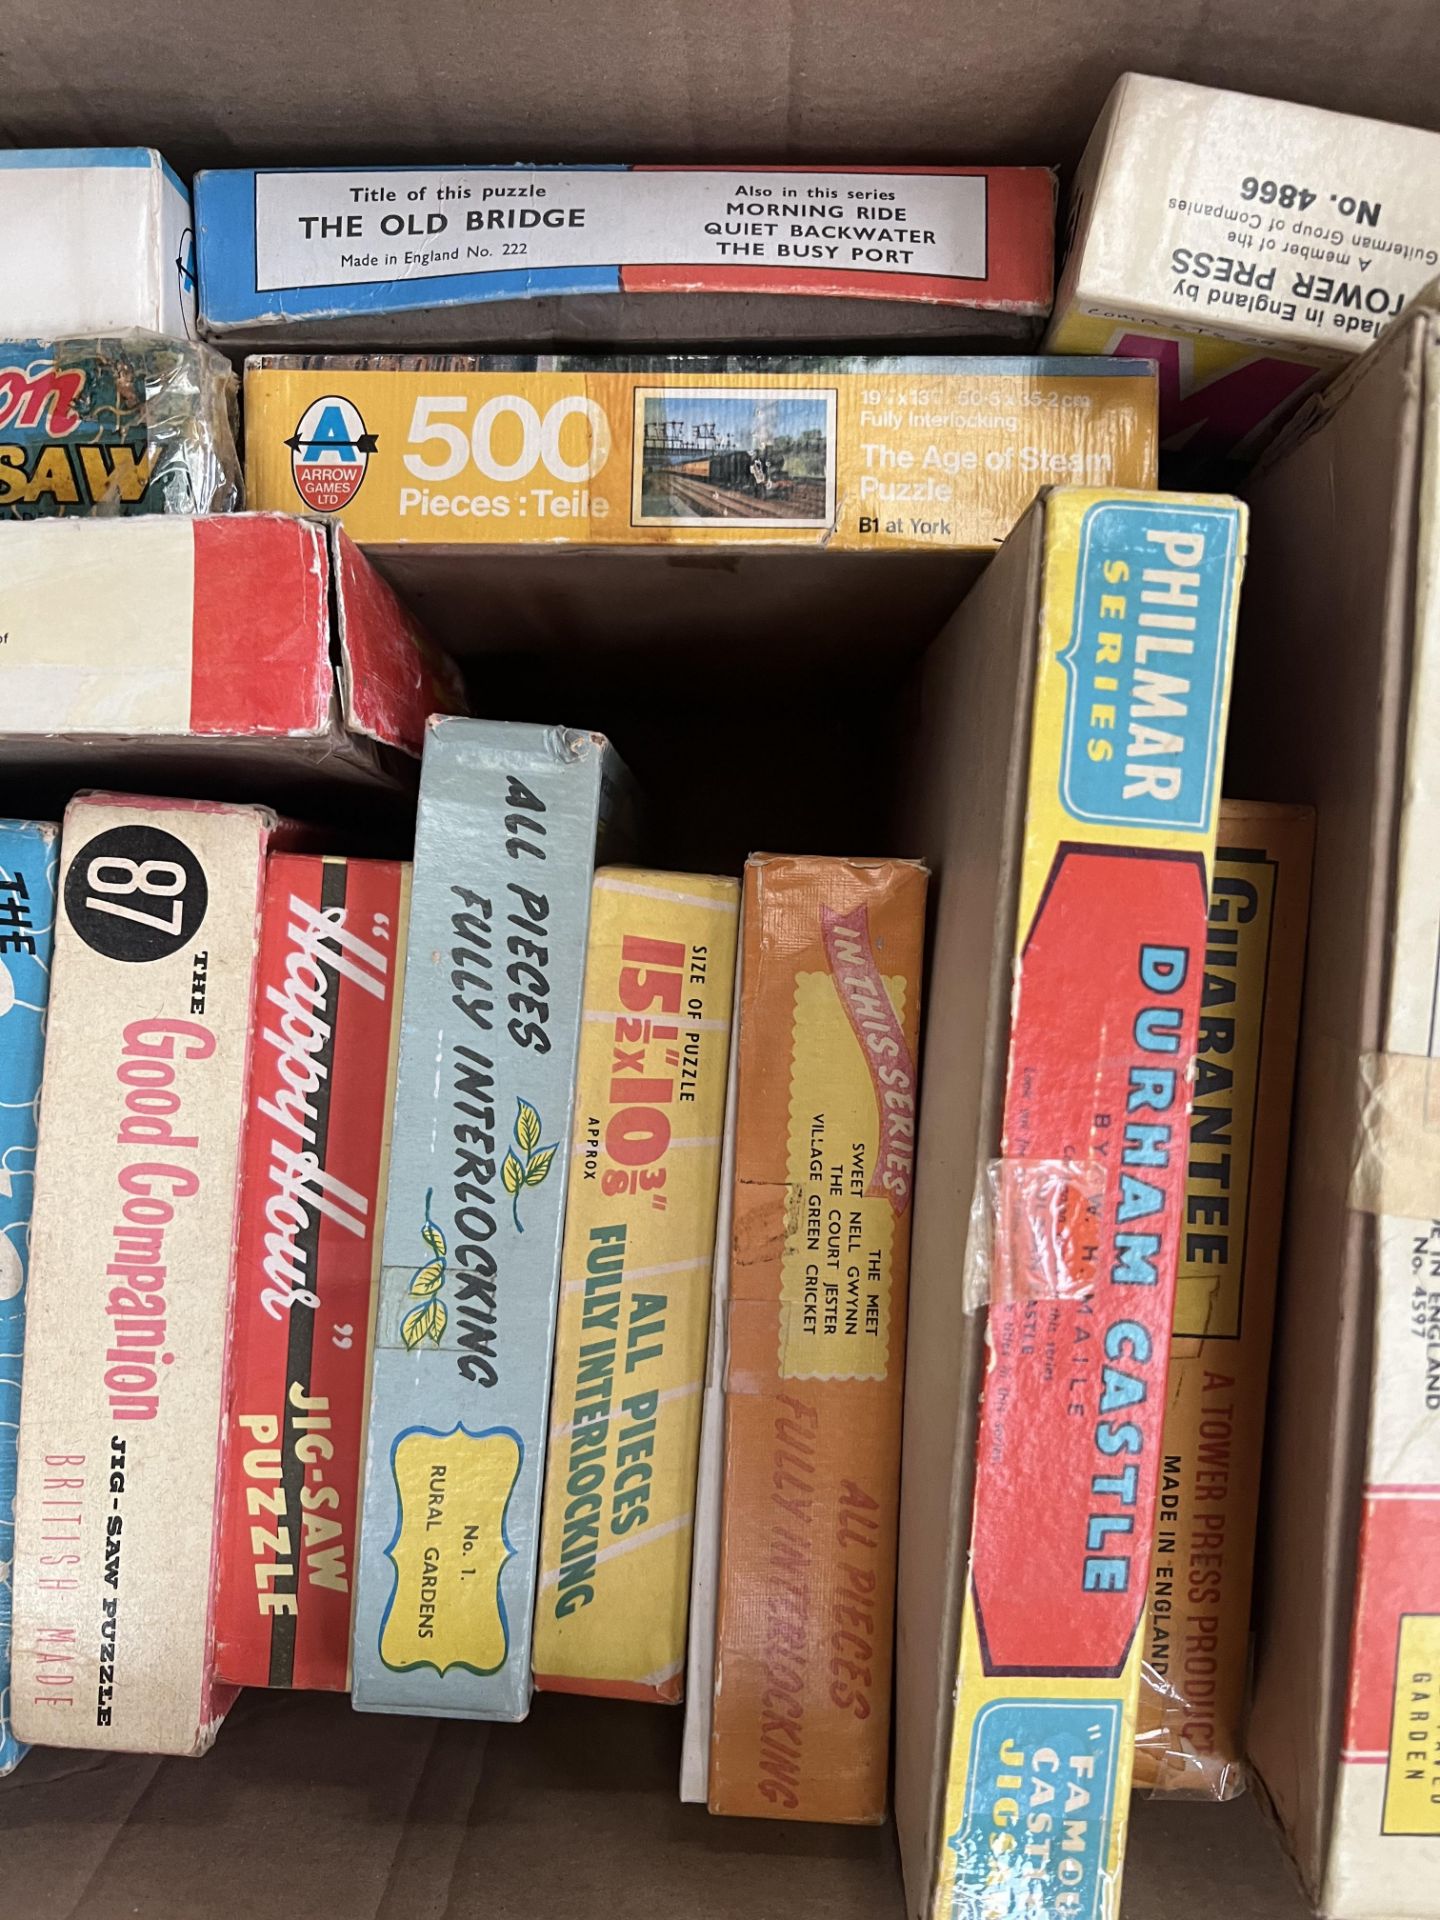 LARGE COLLECTION OF VINTAGE BRITISH JIGSAW PUZZLES - Image 3 of 3